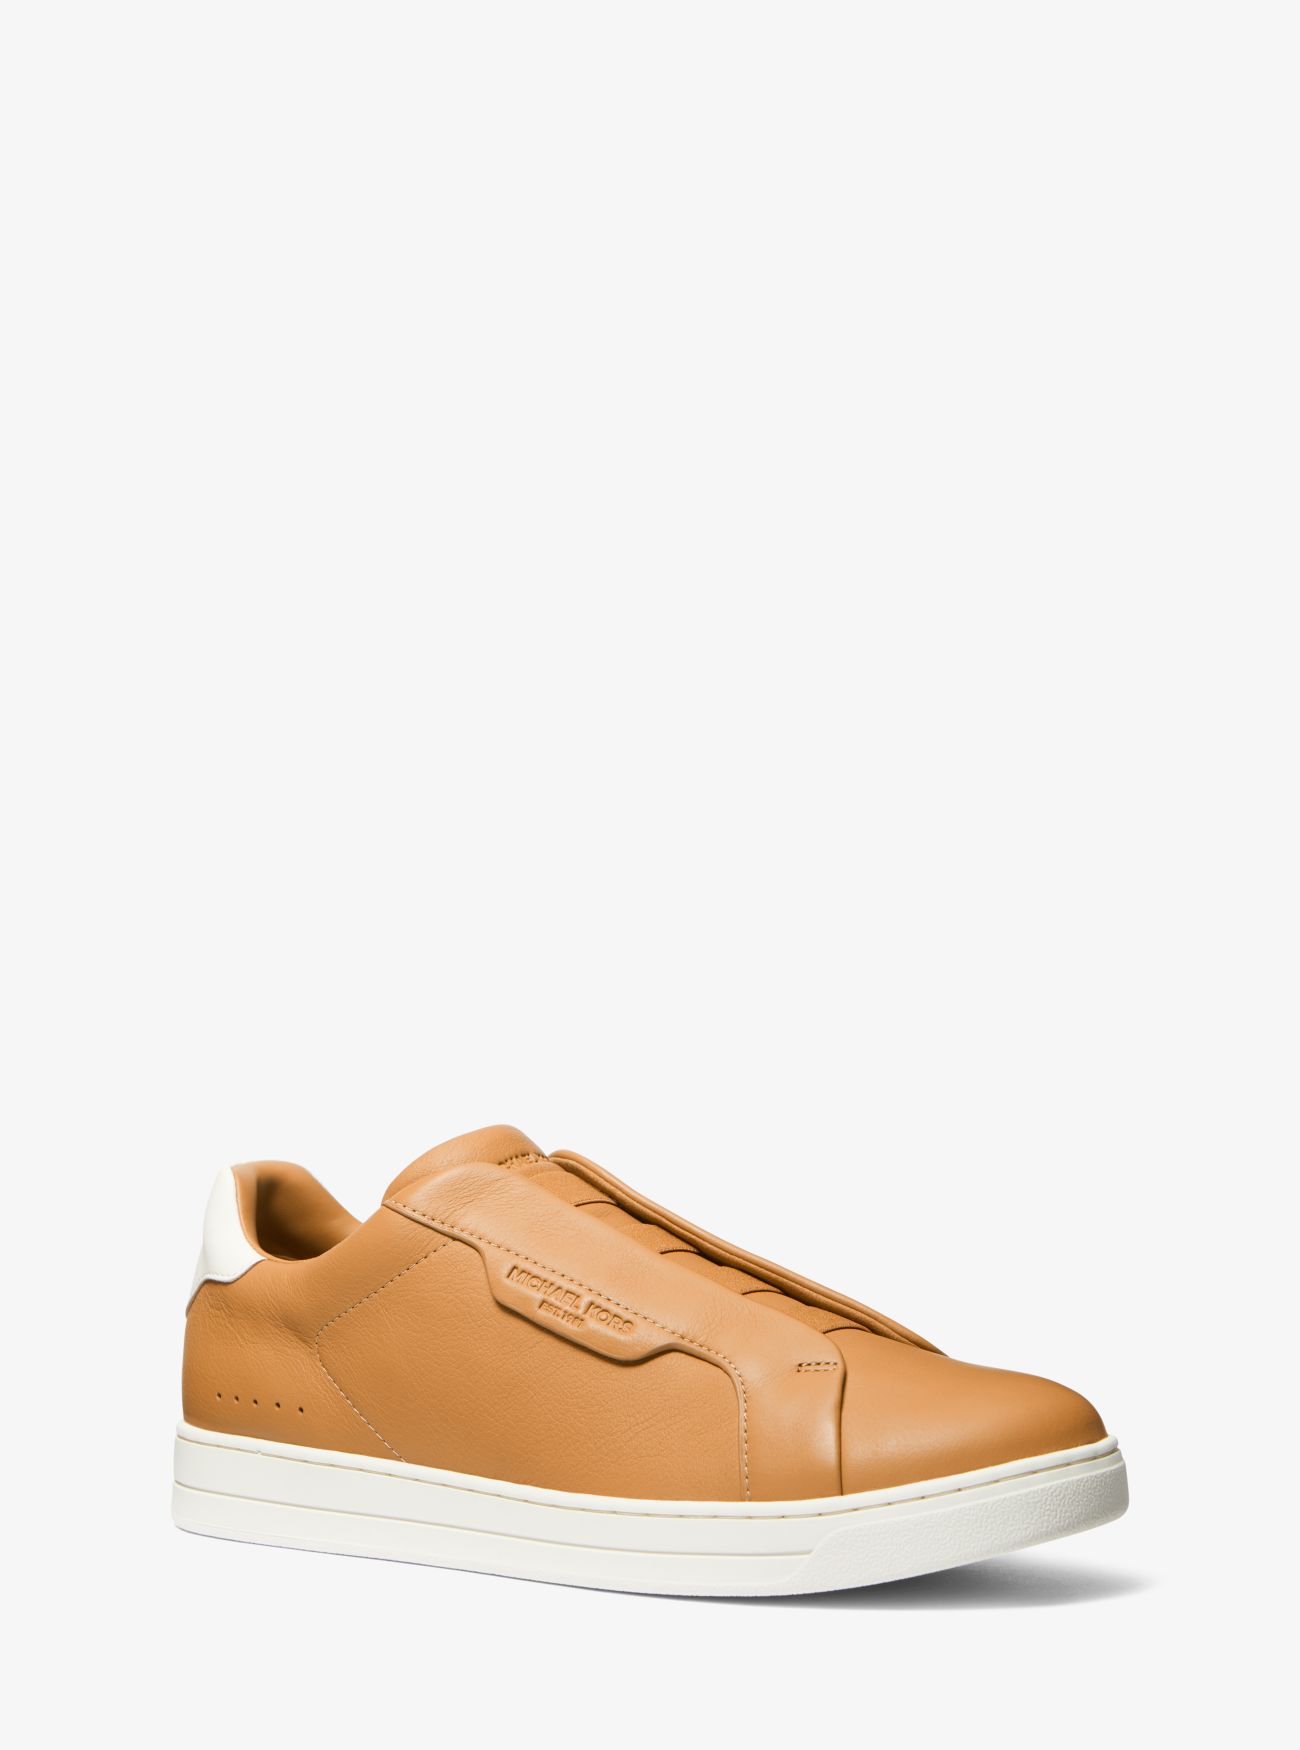 MK Keating Two-Tone Leather Slip-On Trainers - Brown - Michael Kors